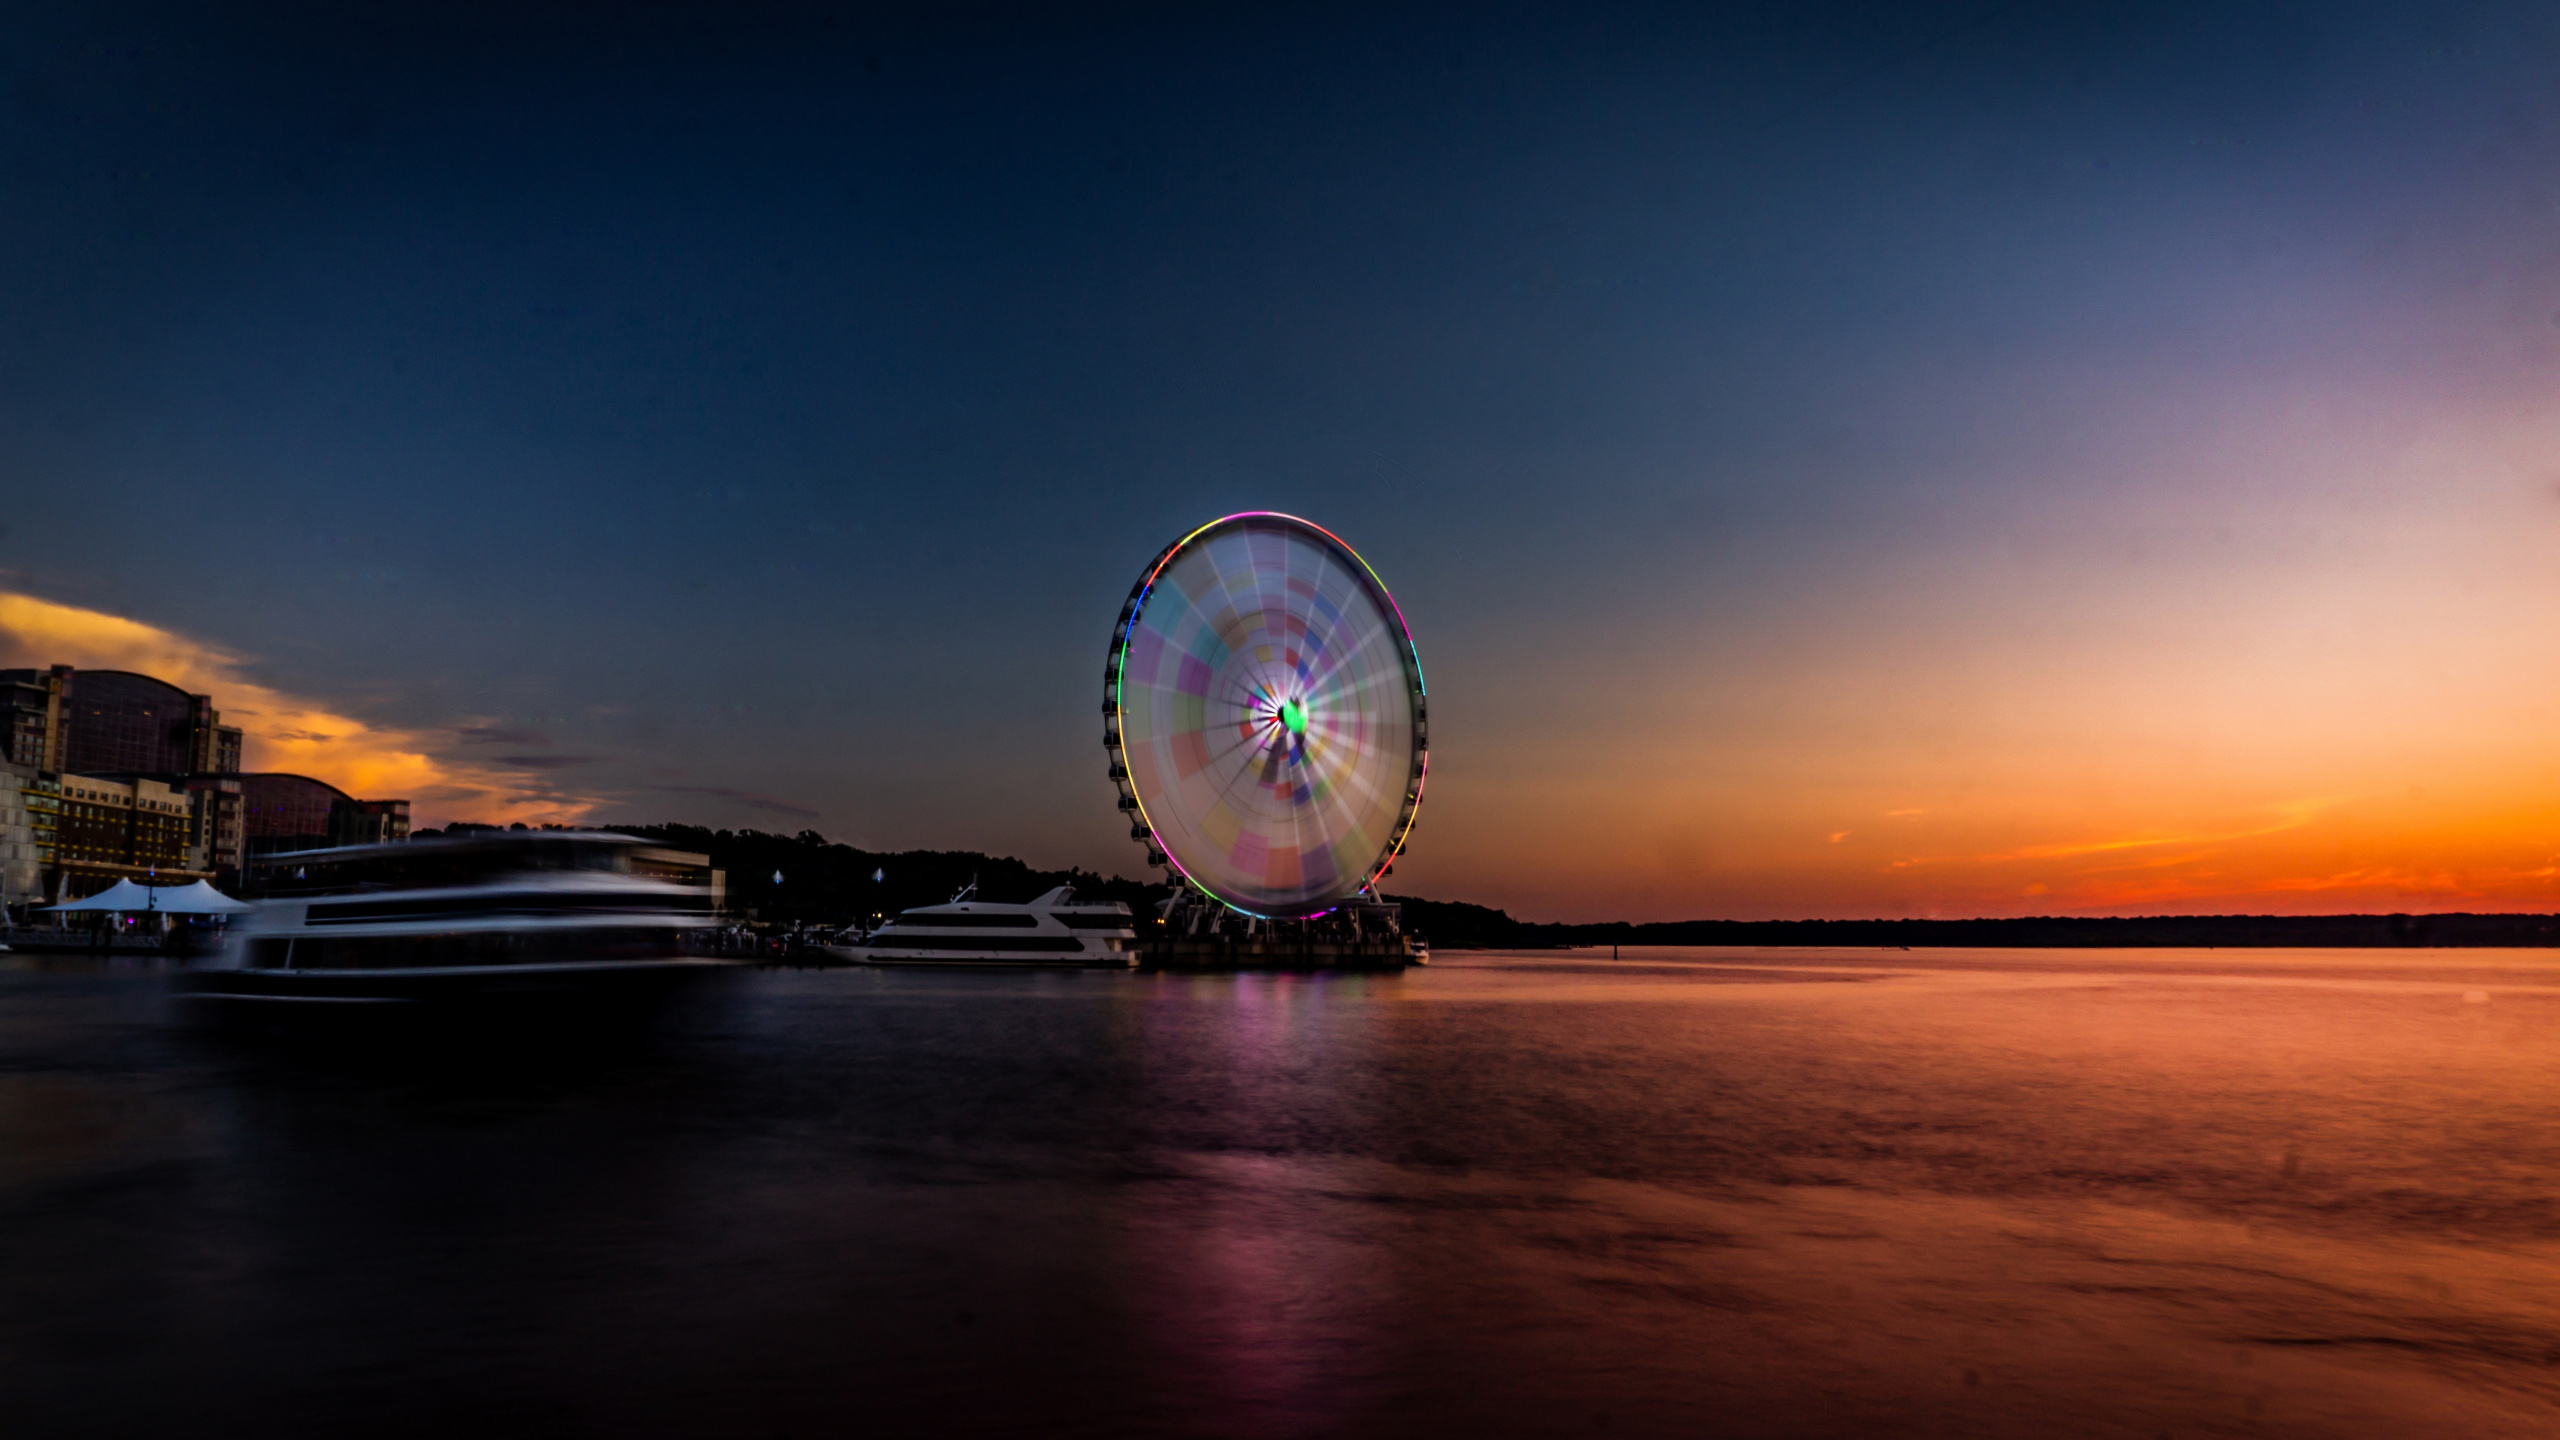 Ferris Wheel Near Body of Water During Night Time. Wallpaper in 2560x1440 Resolution